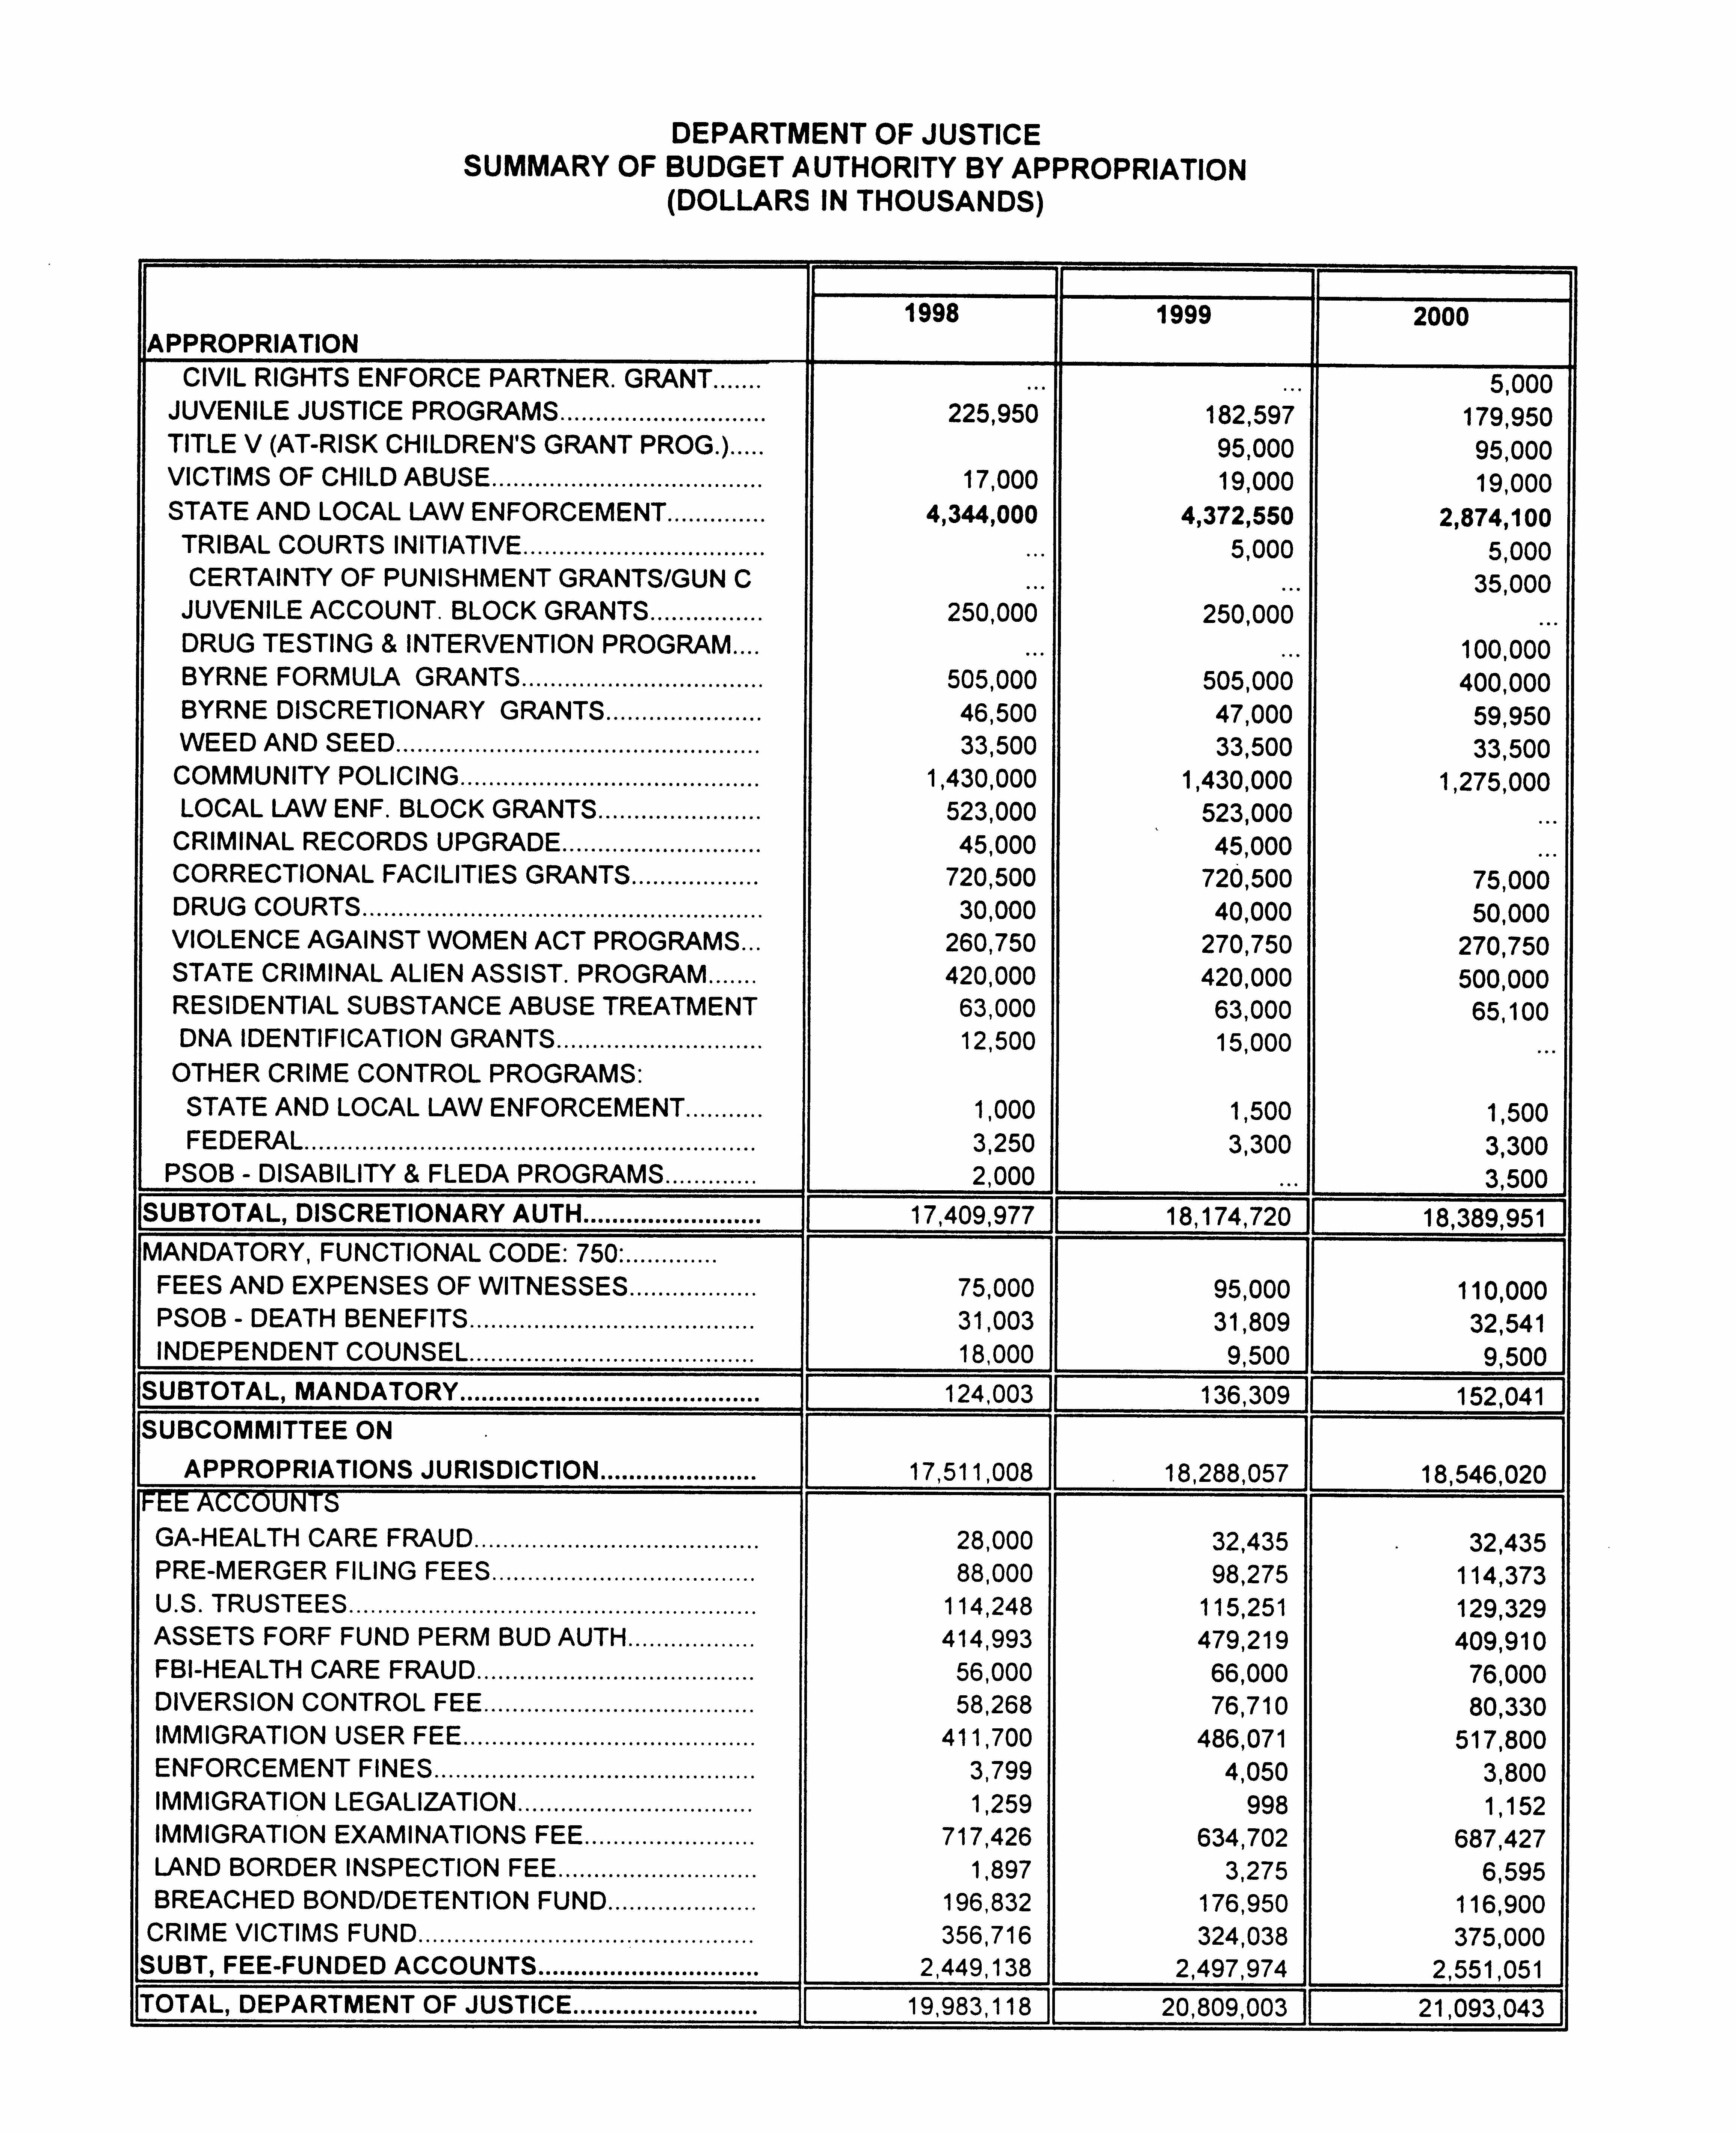 Summary of Budget Authority by Appropriation, 1998 - 2000